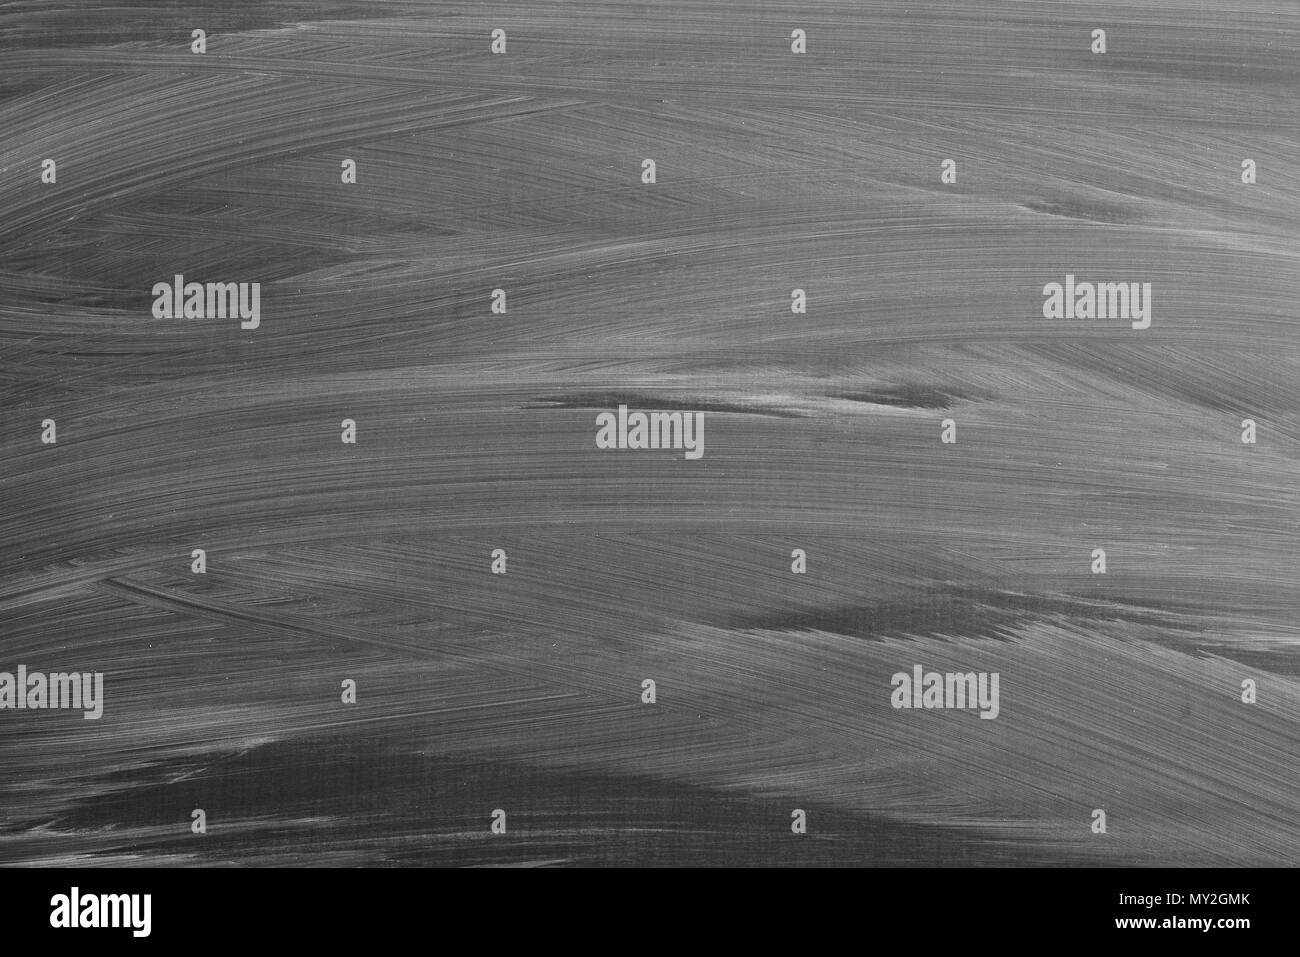 Black grunge dirty empty chalkboard, may be used as background Stock Photo